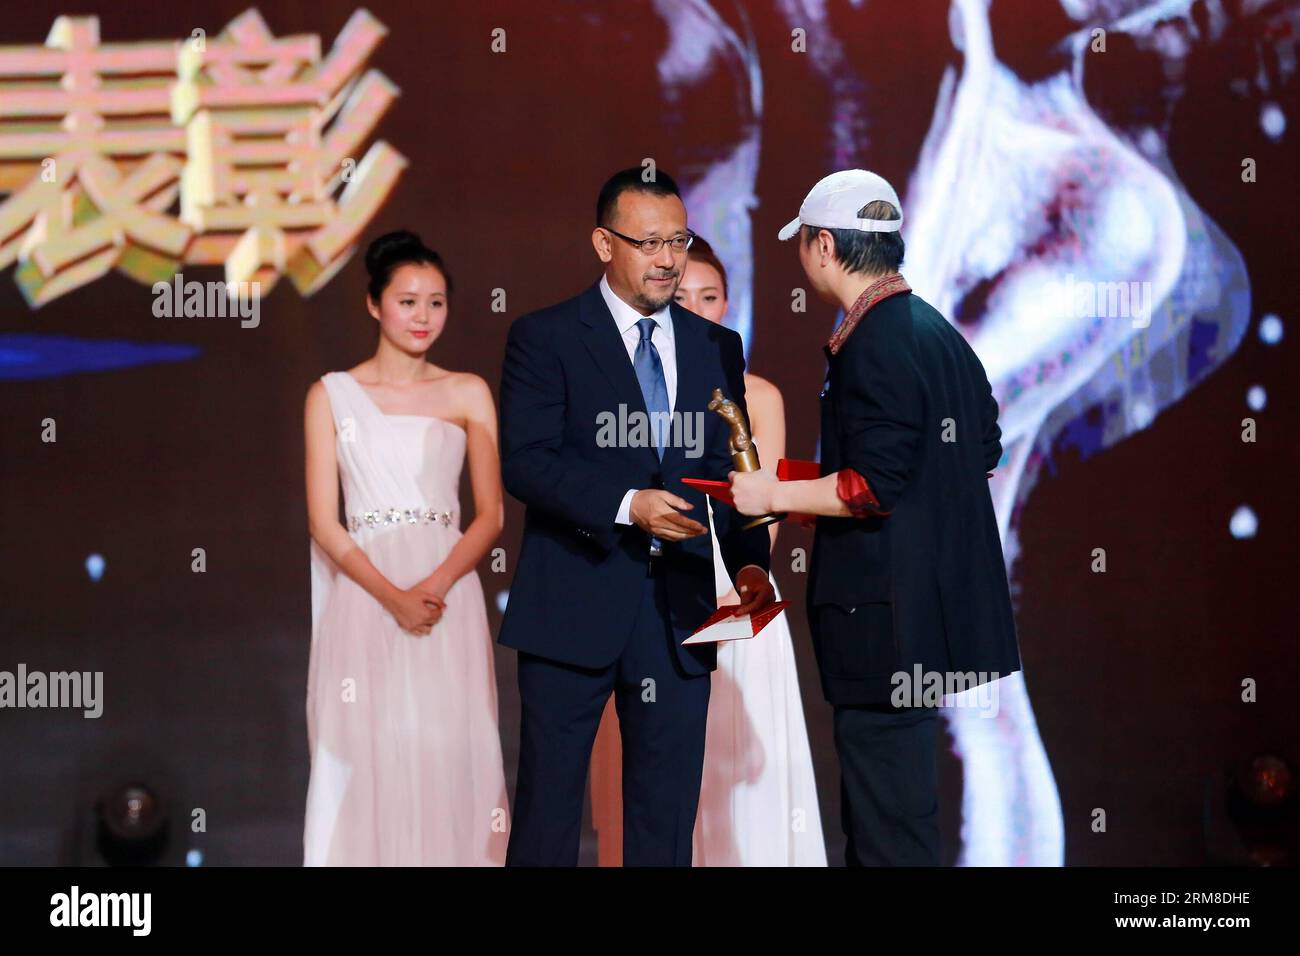 Director Jiang Wen gives an award to singer Cui Jian (R Front) at the 2013 annual commendation conference of China Film Directors Guild in Beijing, capital of China, April 9, 2014. (Xinhua) (zwy) CHINA-BEIJING-COMMENDATION CONFERENCE-CHINA FILM DIRECTORS GUILD(CN) PUBLICATIONxNOTxINxCHN   Director Jiang Wen Gives to Award to Singer Cui Jian r Front AT The 2013 Annual  Conference of China Film Directors Guild in Beijing Capital of China April 9 2014 XINHUA  China Beijing  Conference China Film Directors Guild CN PUBLICATIONxNOTxINxCHN Stock Photo